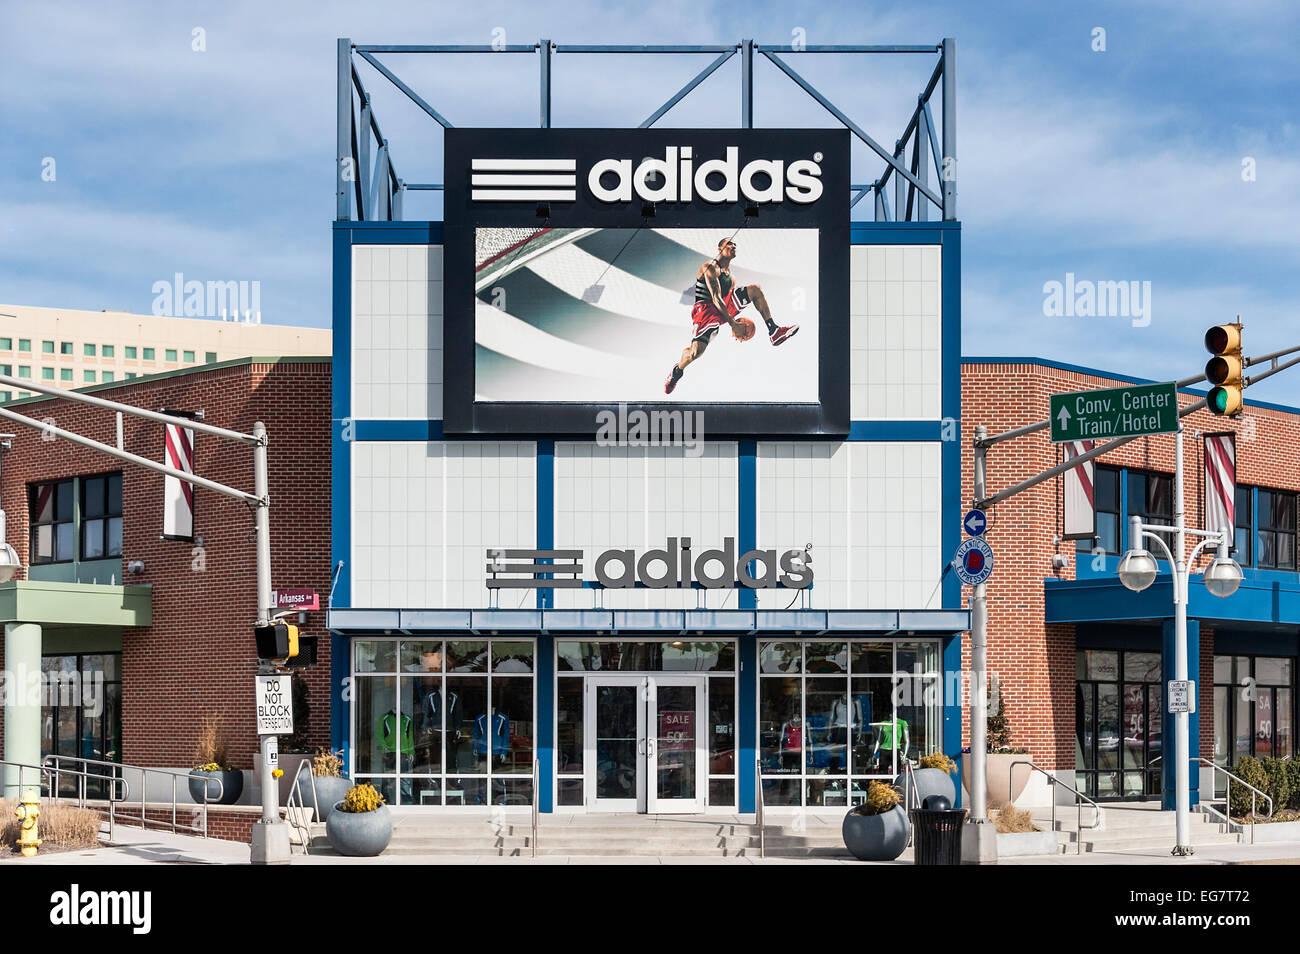 outlet adidas usa online